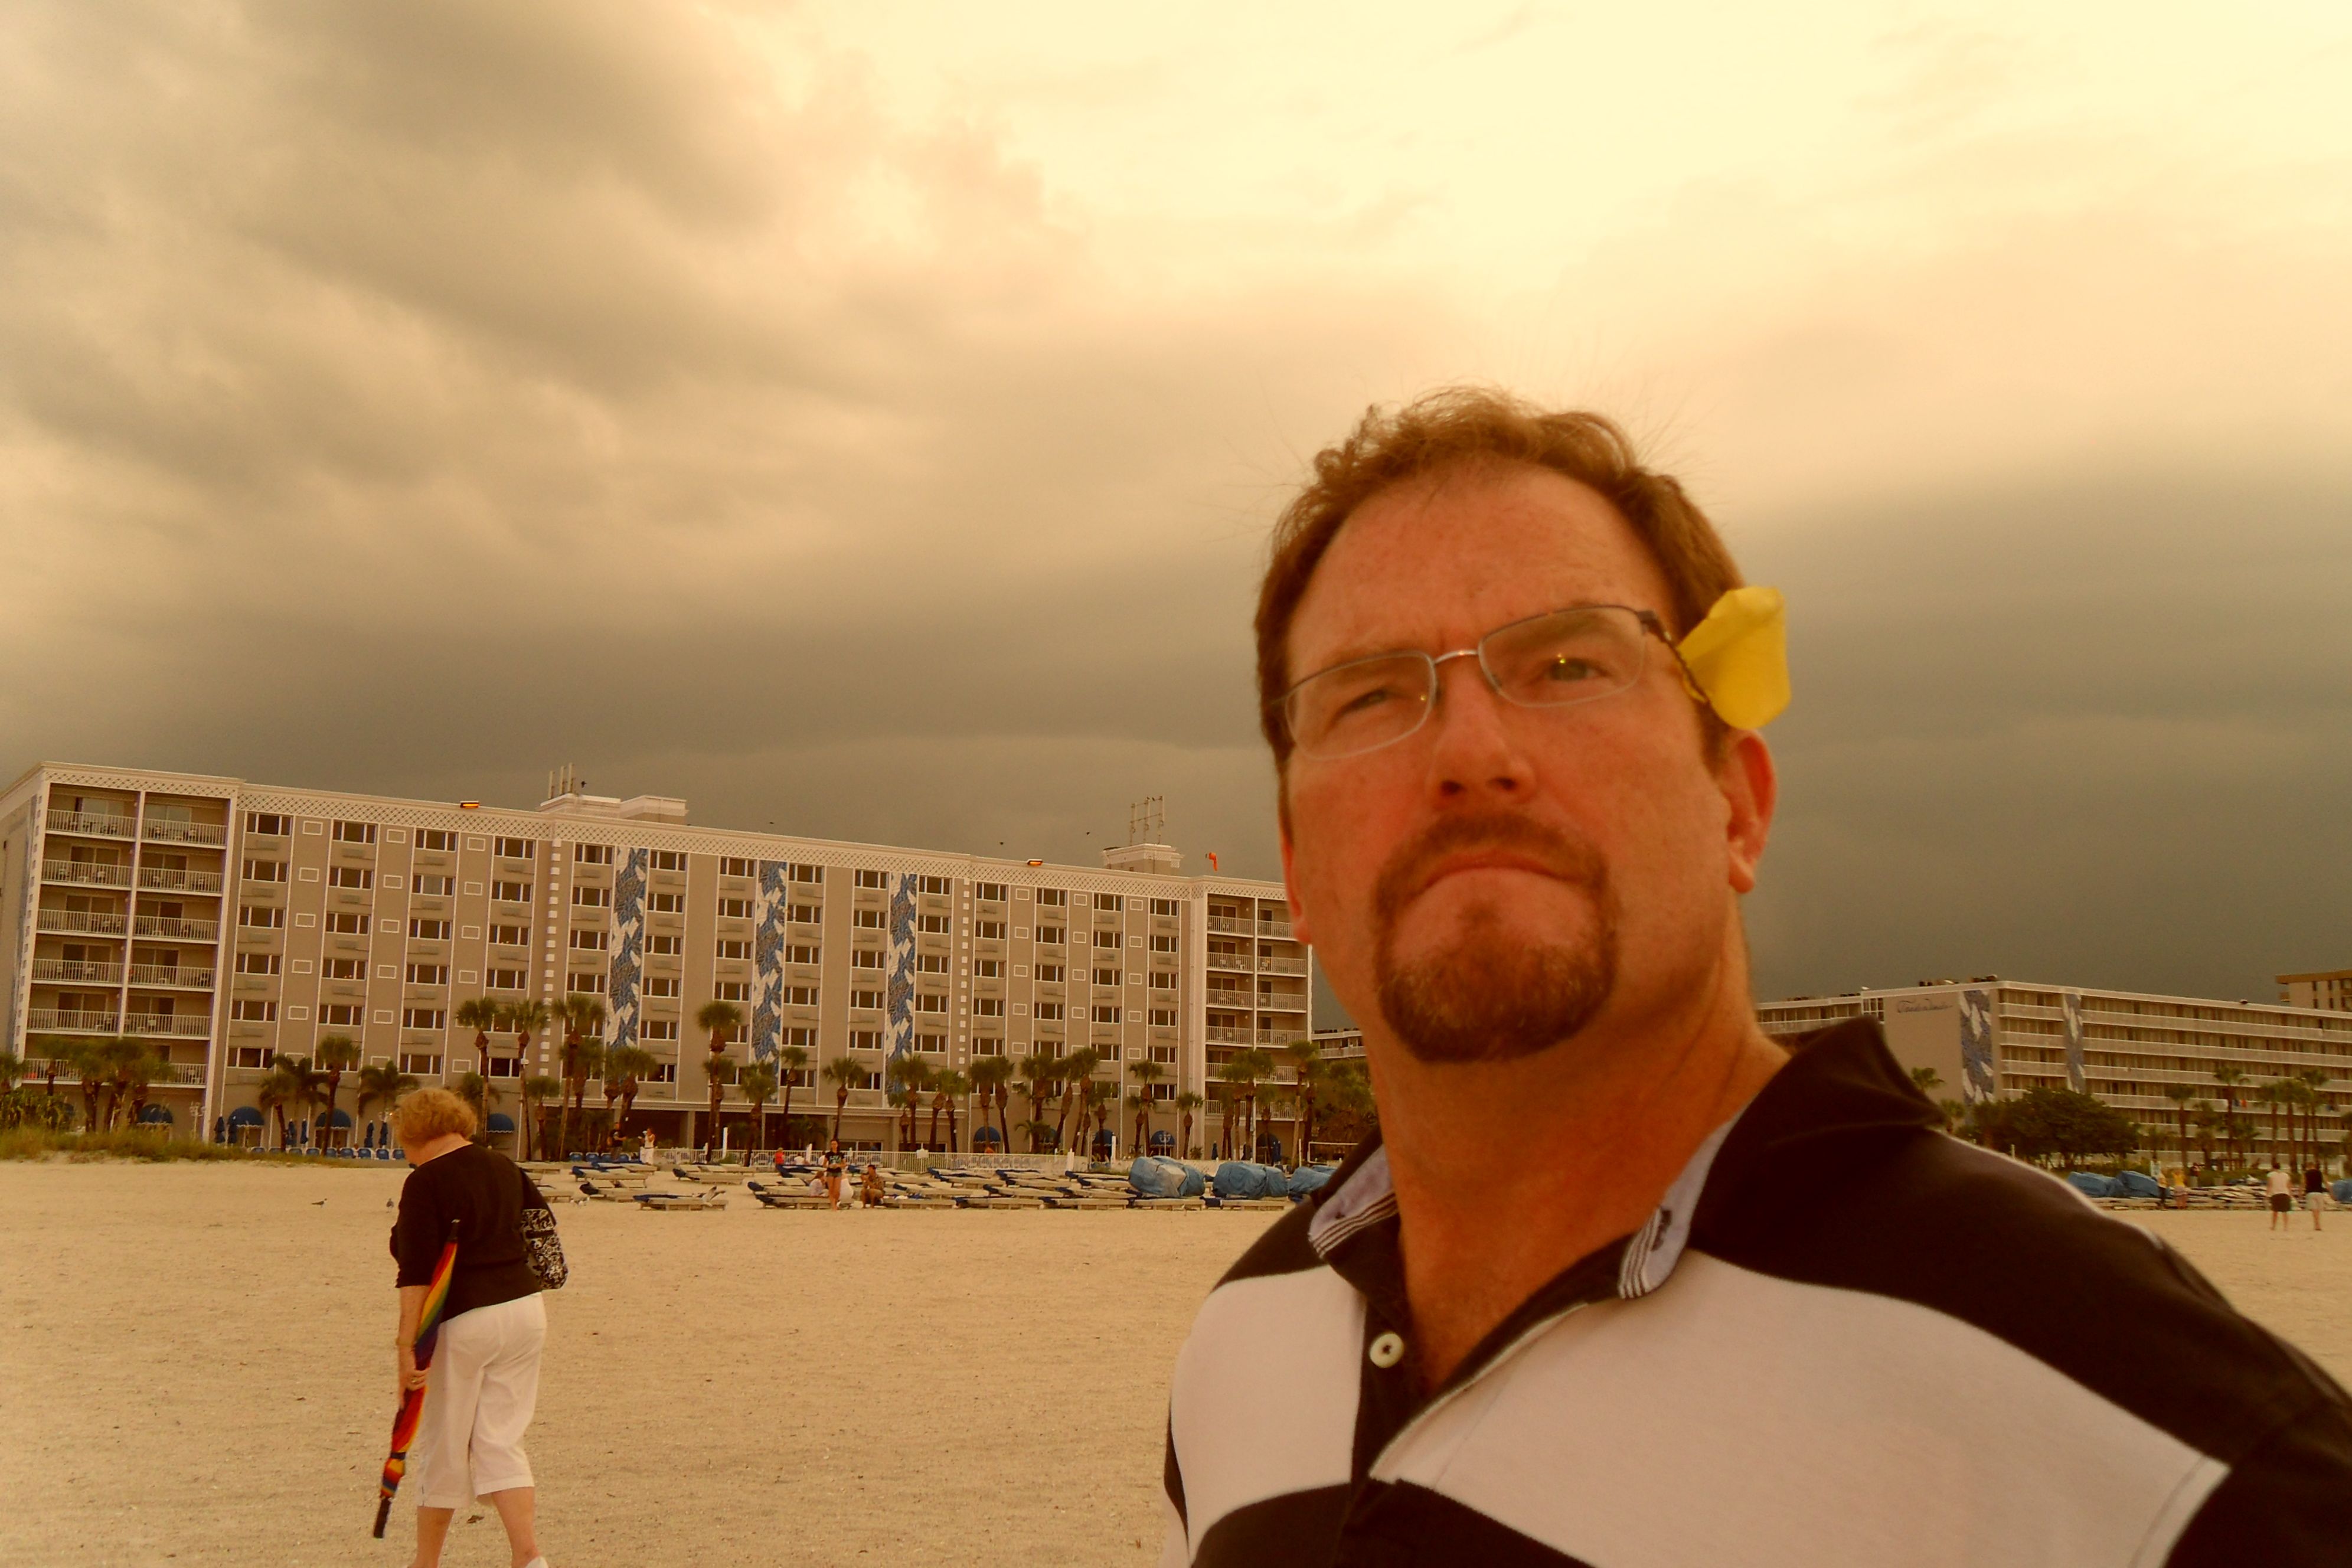 Contemplating the 60 mph wind on Clearwater beach, usually the last to leave